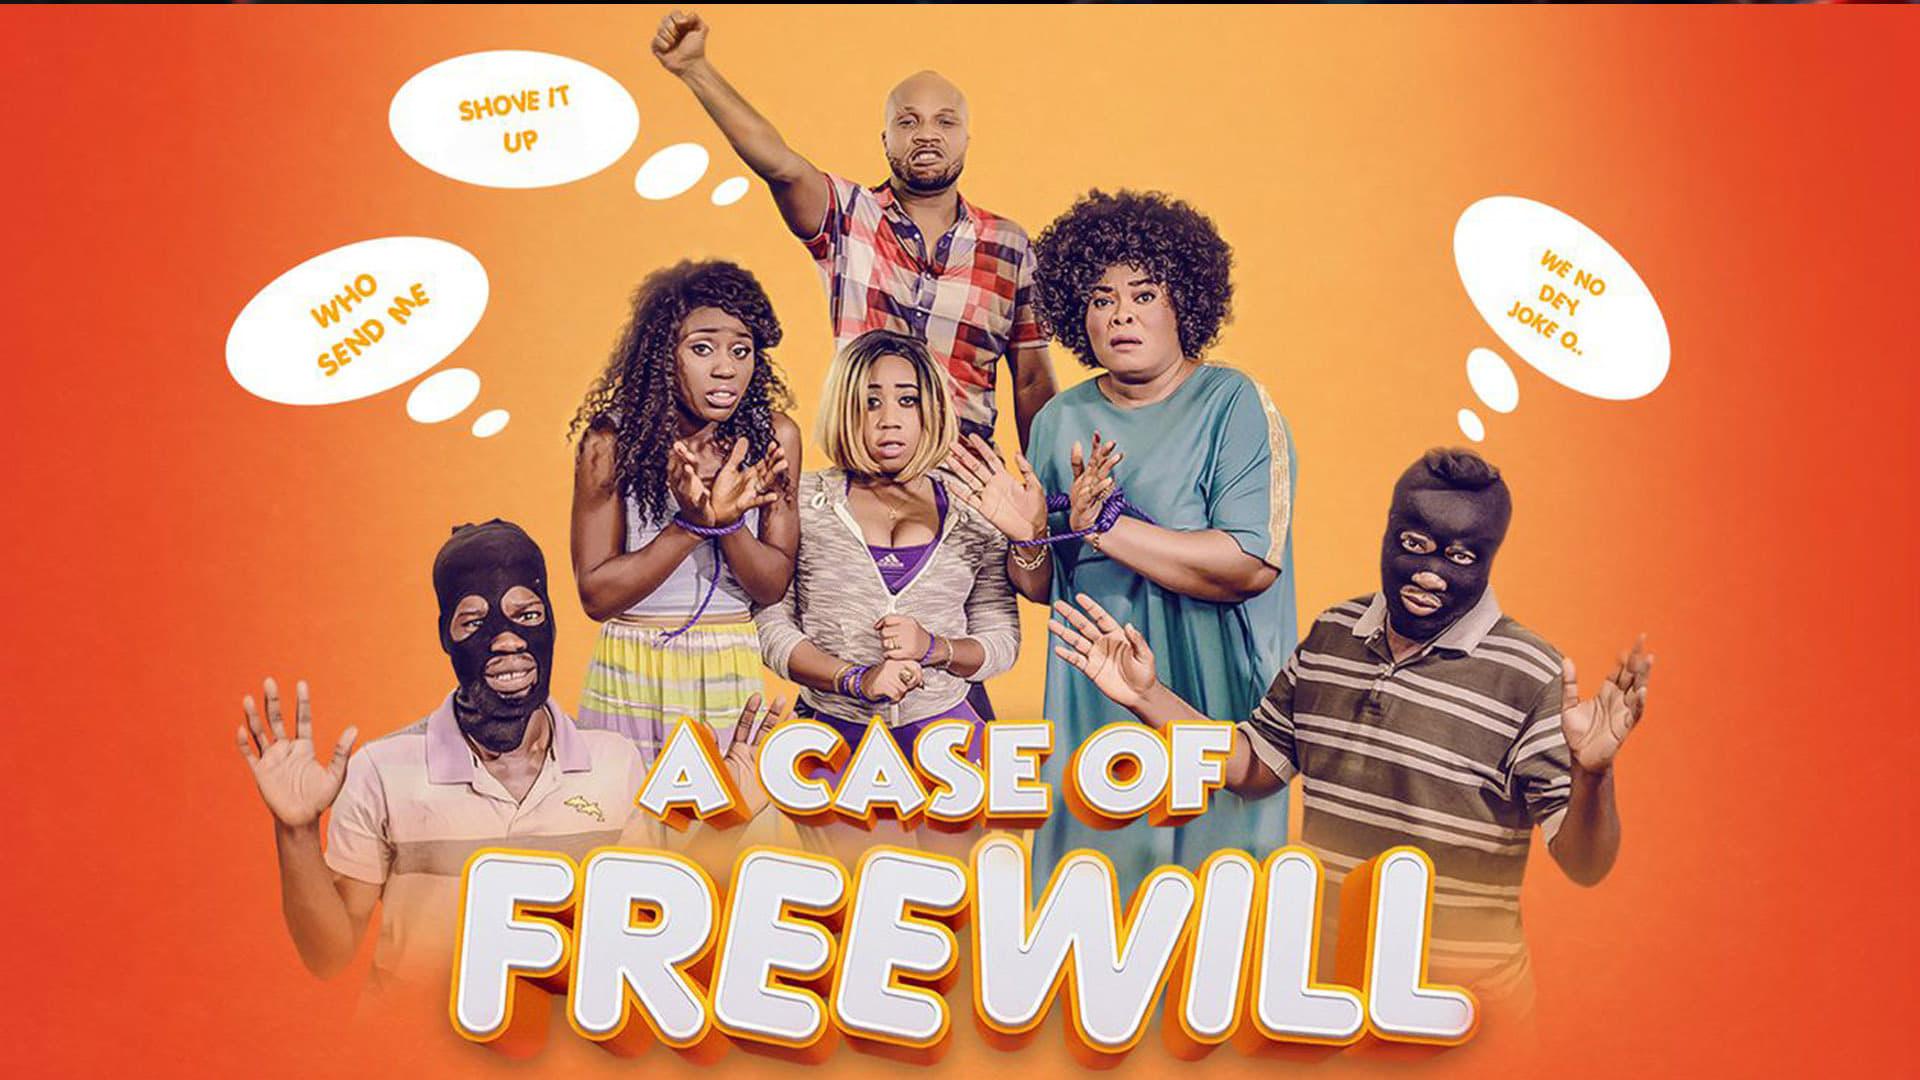 A Case of Freewill backdrop